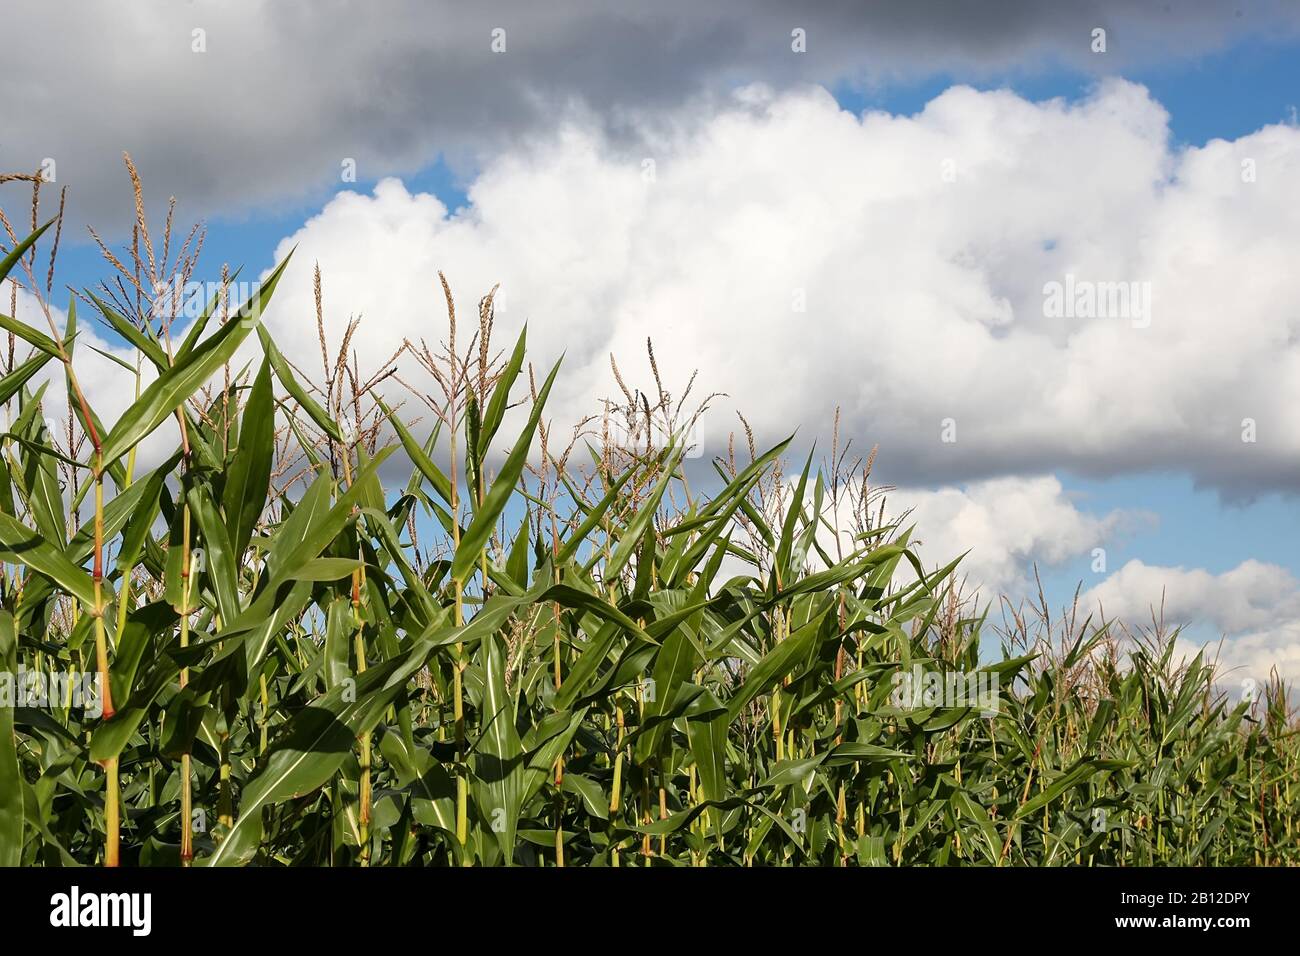 Corn stalks with puffy clouds. Stock Photo